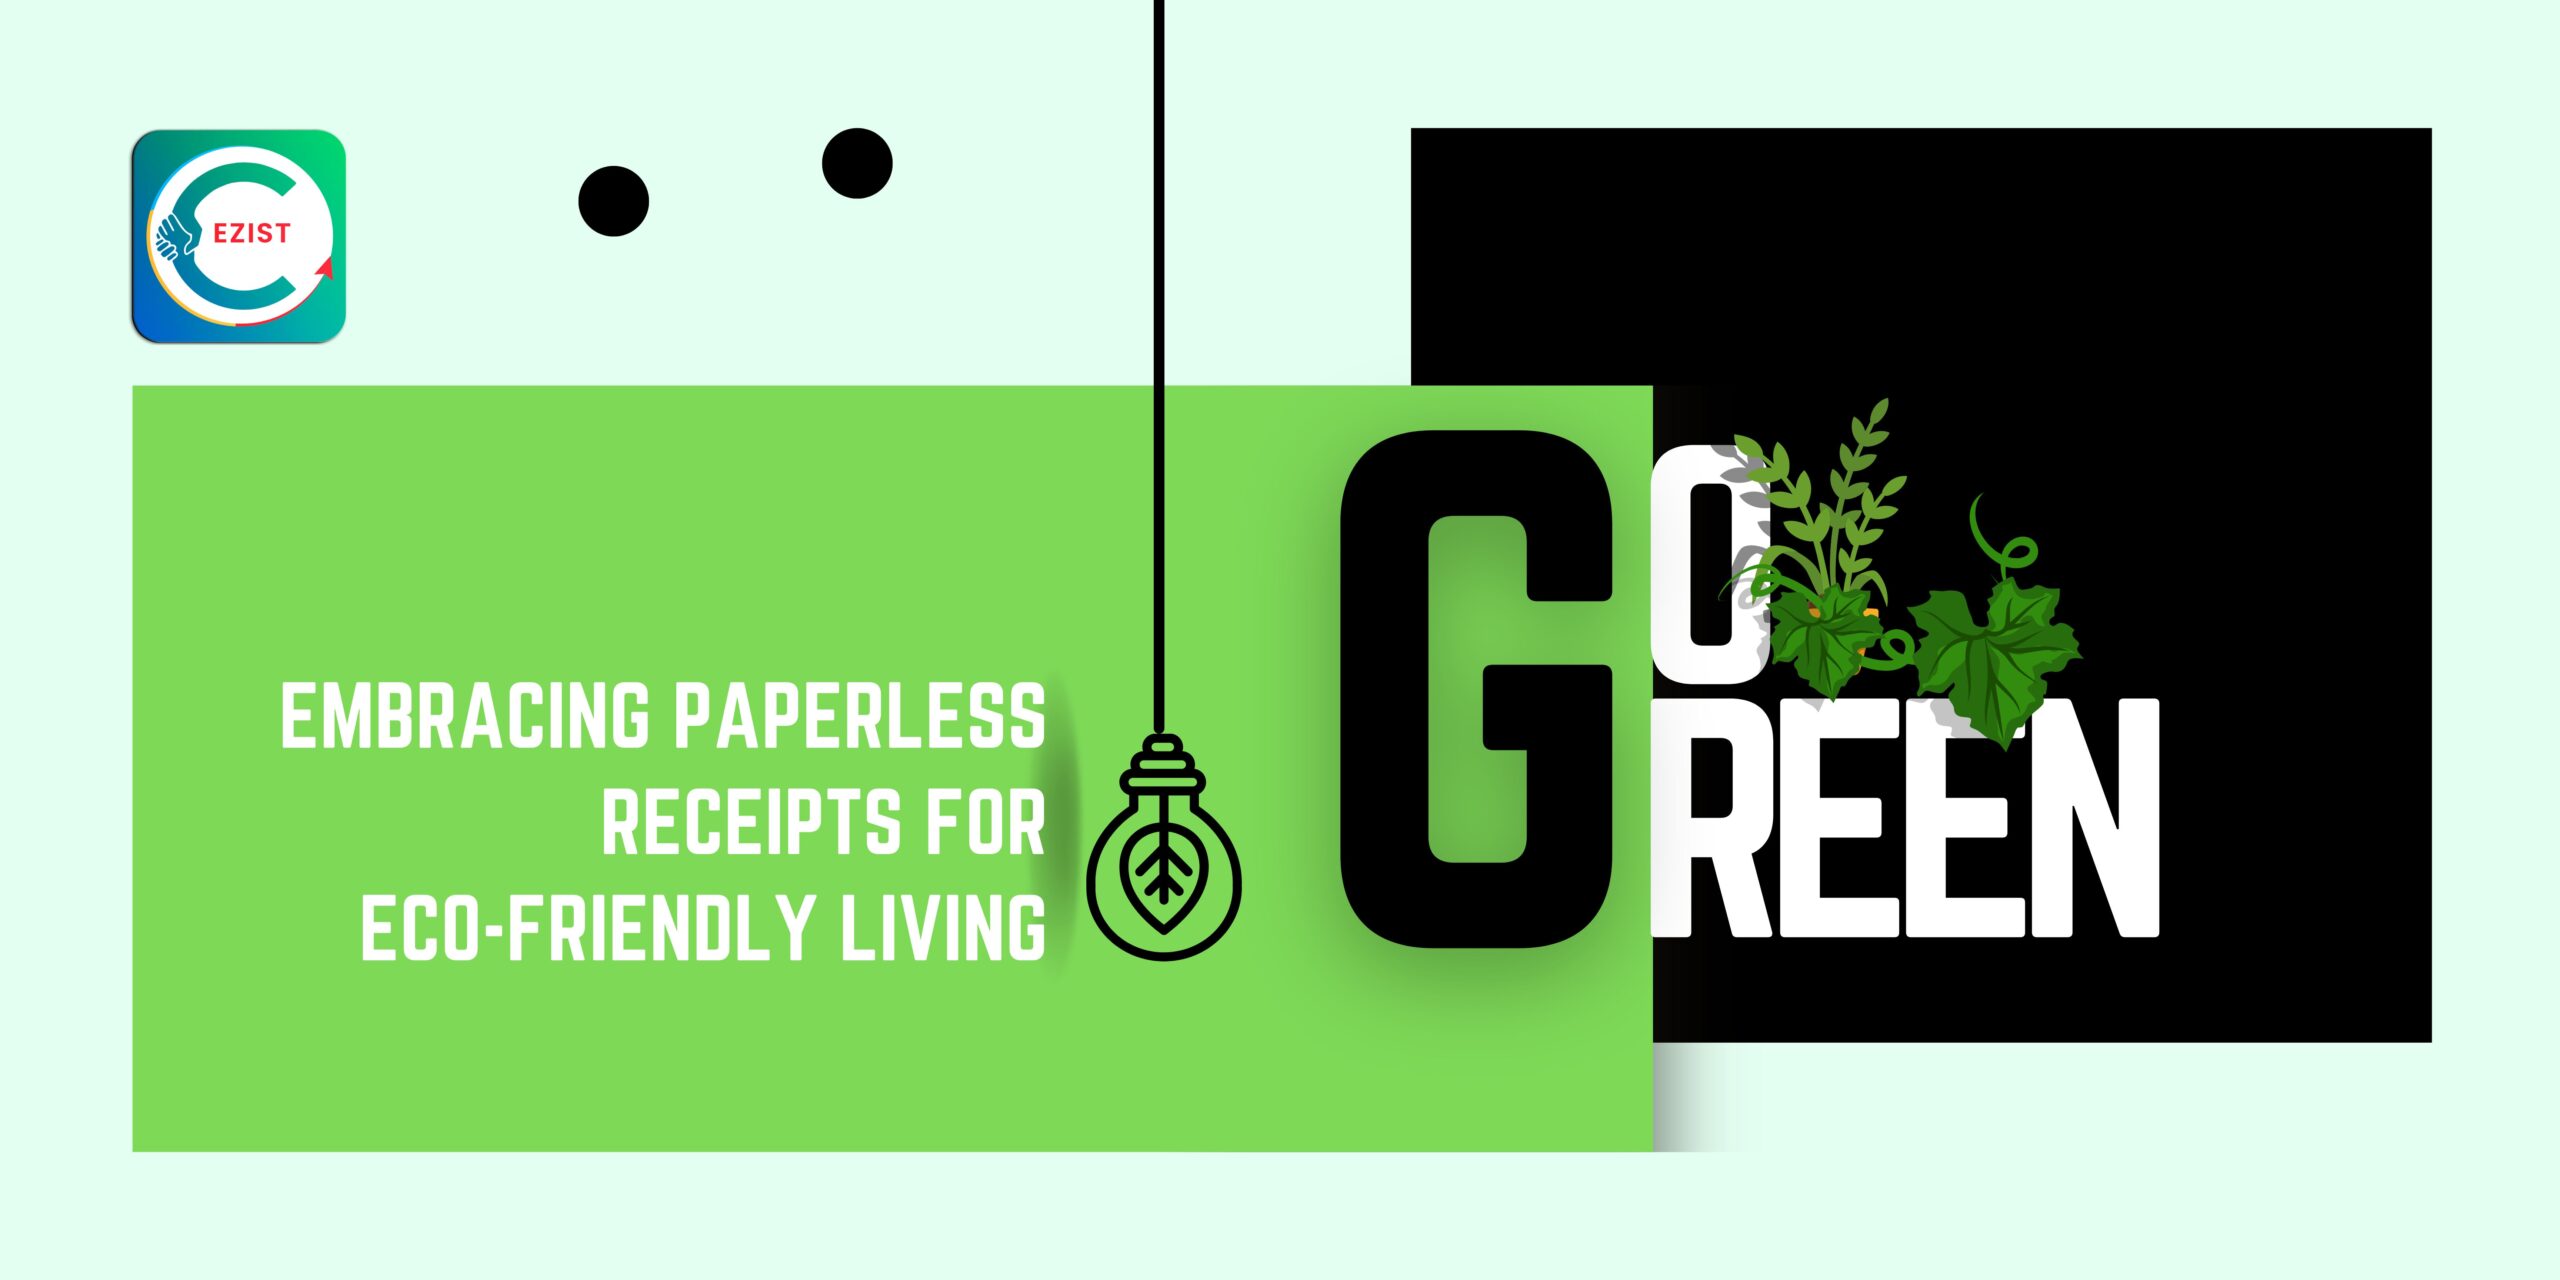 Go Green, Embracing Paperless Receipts for Eco-Friendly Living